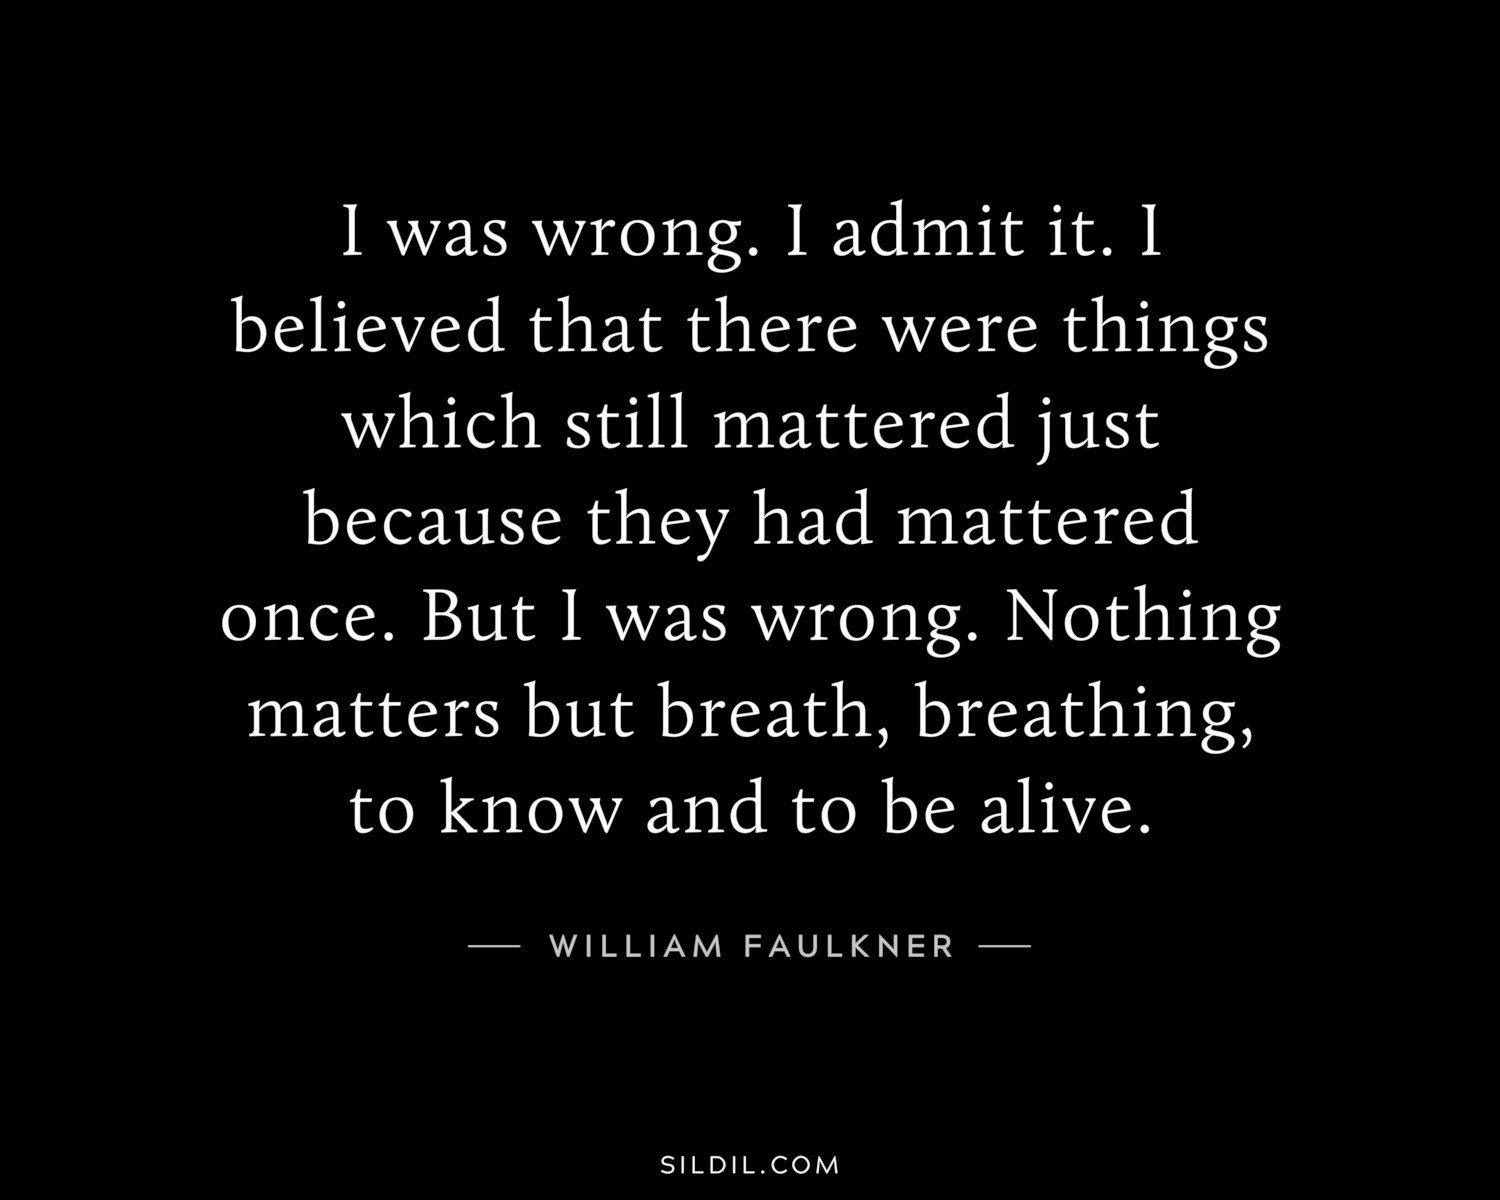 I was wrong. I admit it. I believed that there were things which still mattered just because they had mattered once. But I was wrong. Nothing matters but breath, breathing, to know and to be alive.